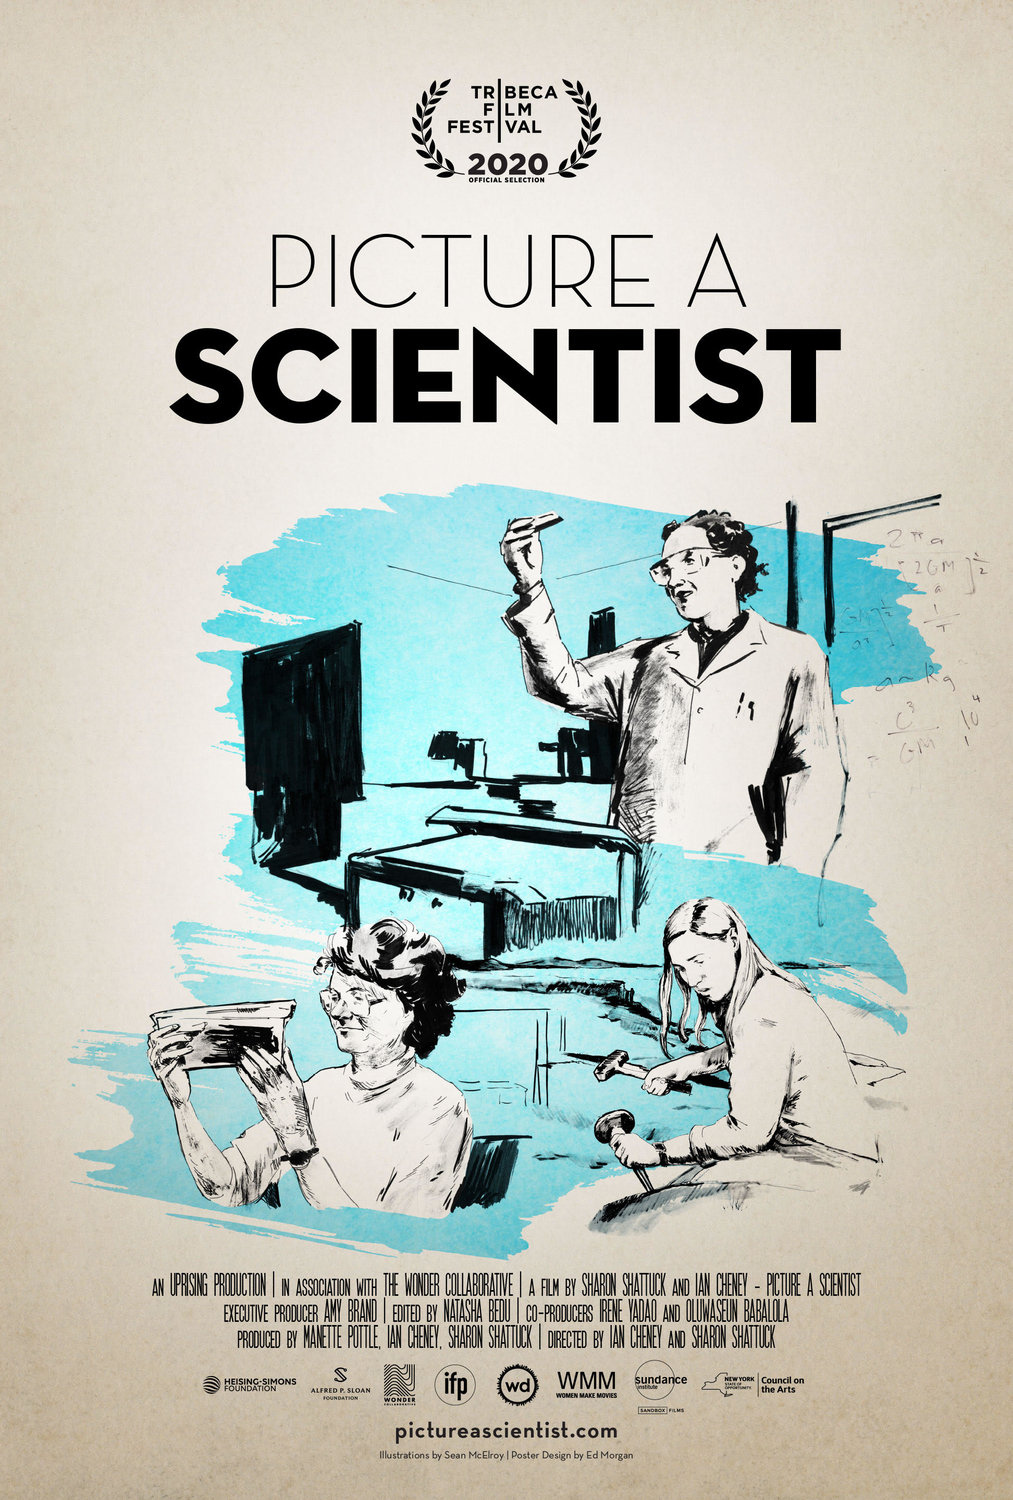 SCREENING — Among the events to celebrate Women’s History Month will be a screening of the the documentary, “Picture a Scientist,” which chronicles the groundswell of researchers writing a new chapter for female scientists, at 5 p.m. Monday, March 21, in Alumni College Center room 116 at MVCC’s Utica Campus.